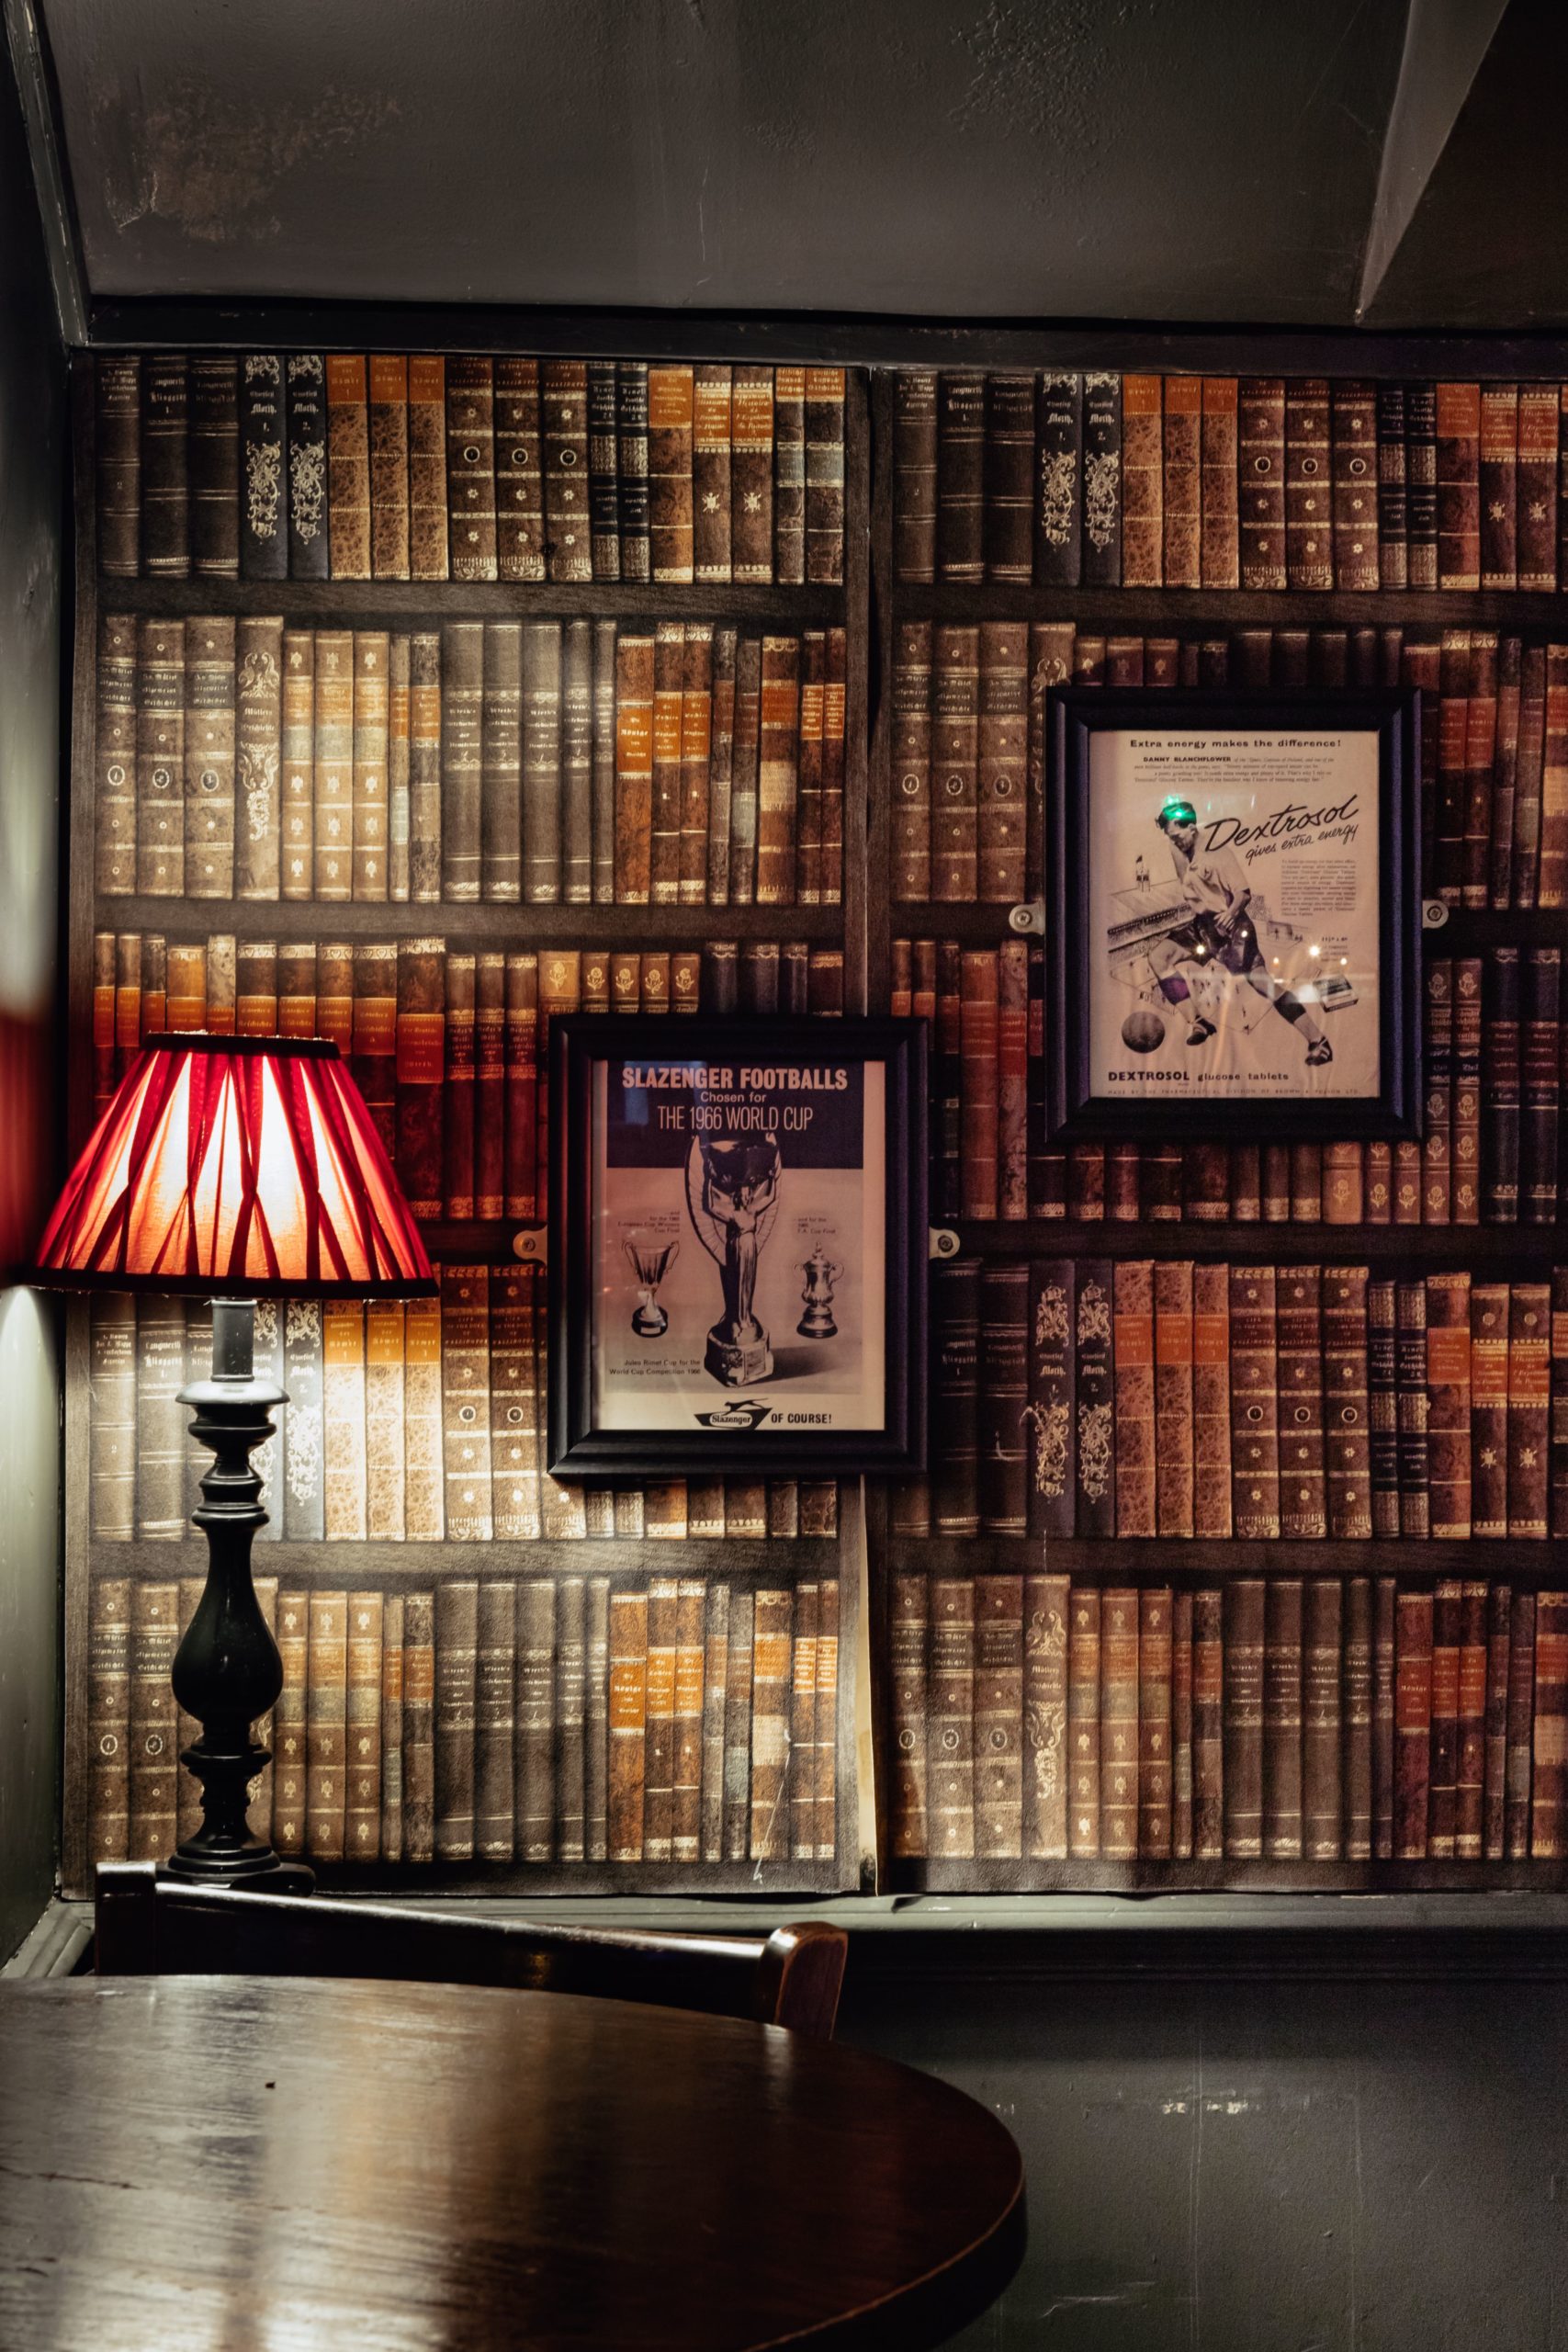 The bookcase room at The Old Grindstone